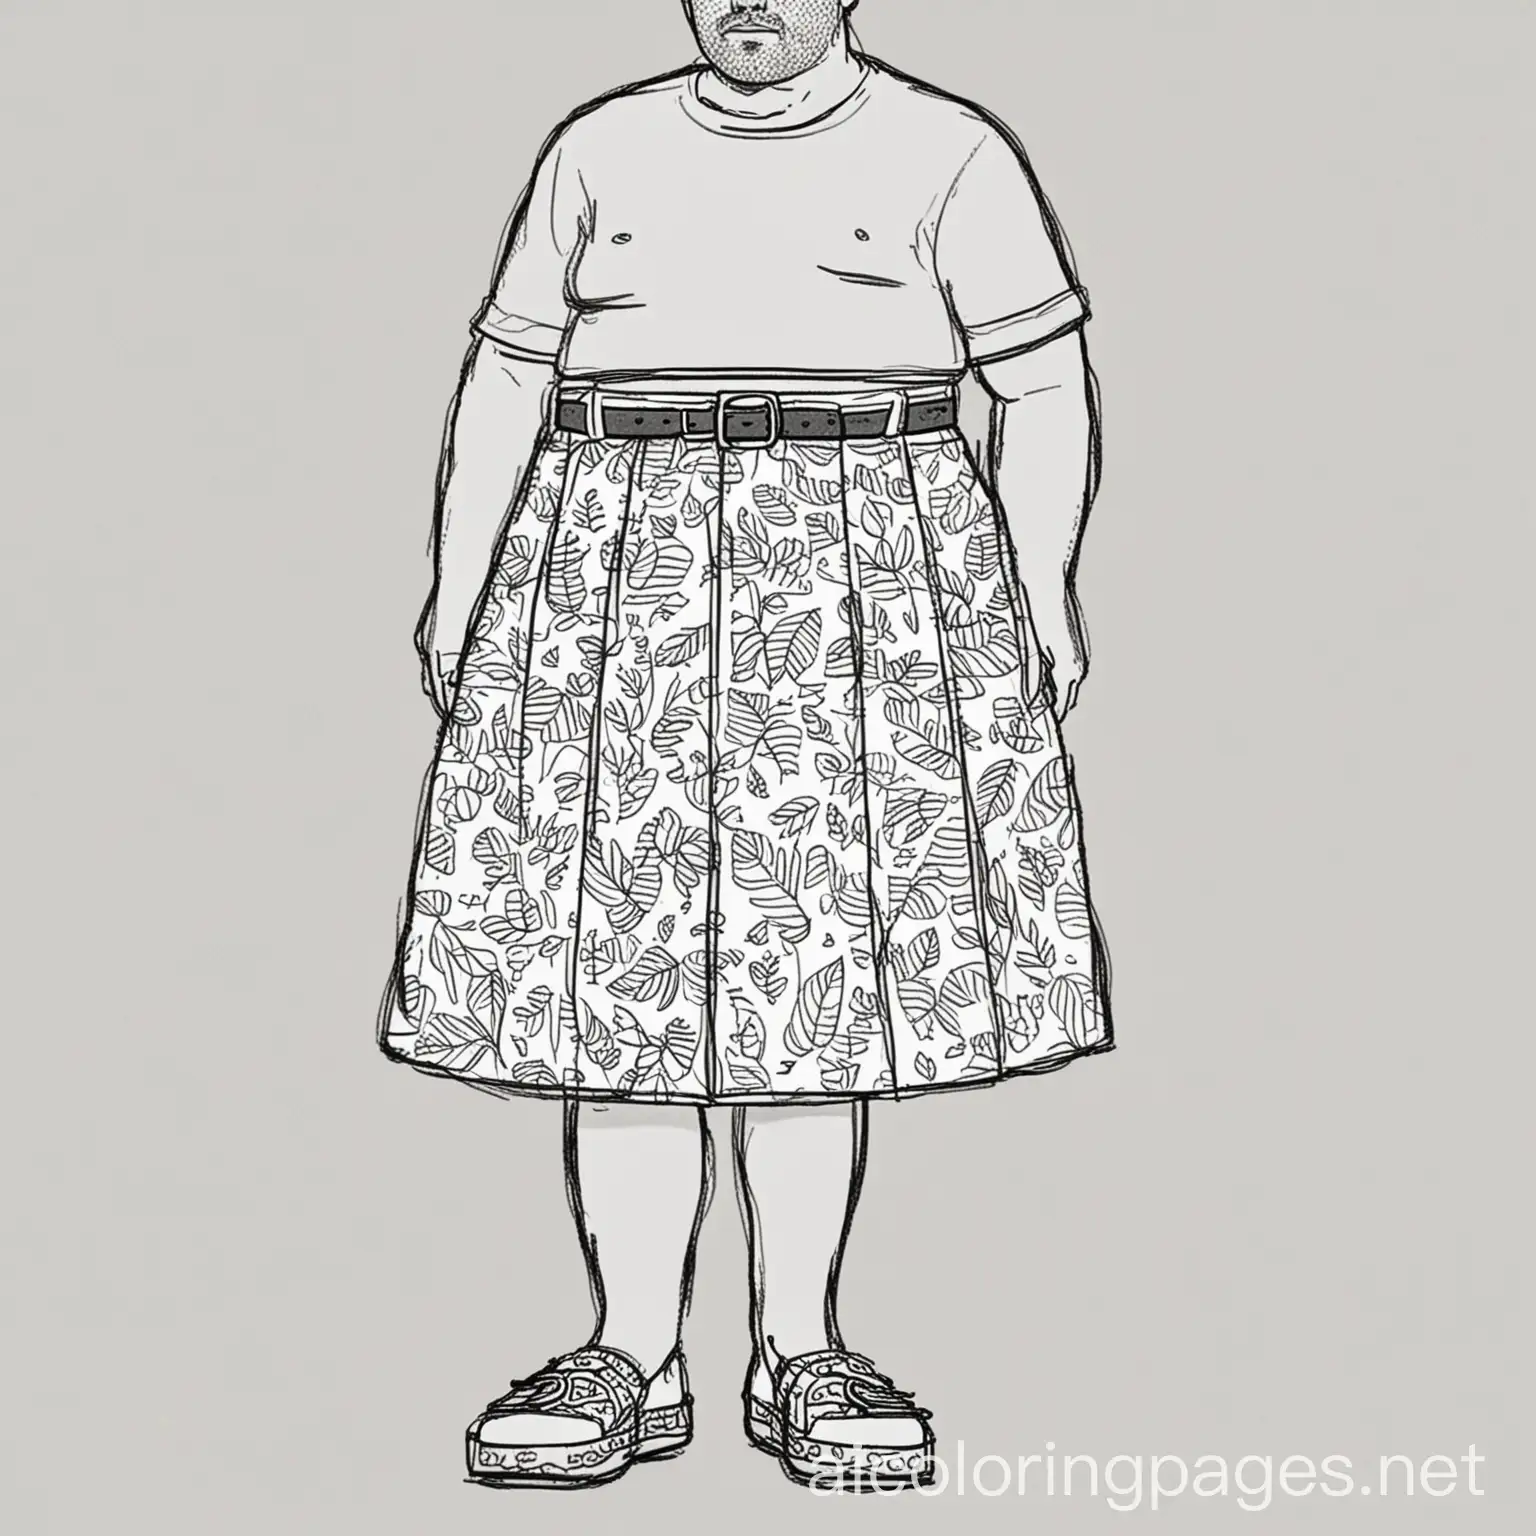 Tall-Fat-Guy-in-LeafPatterned-Skirt-and-Crocs-Coloring-Page